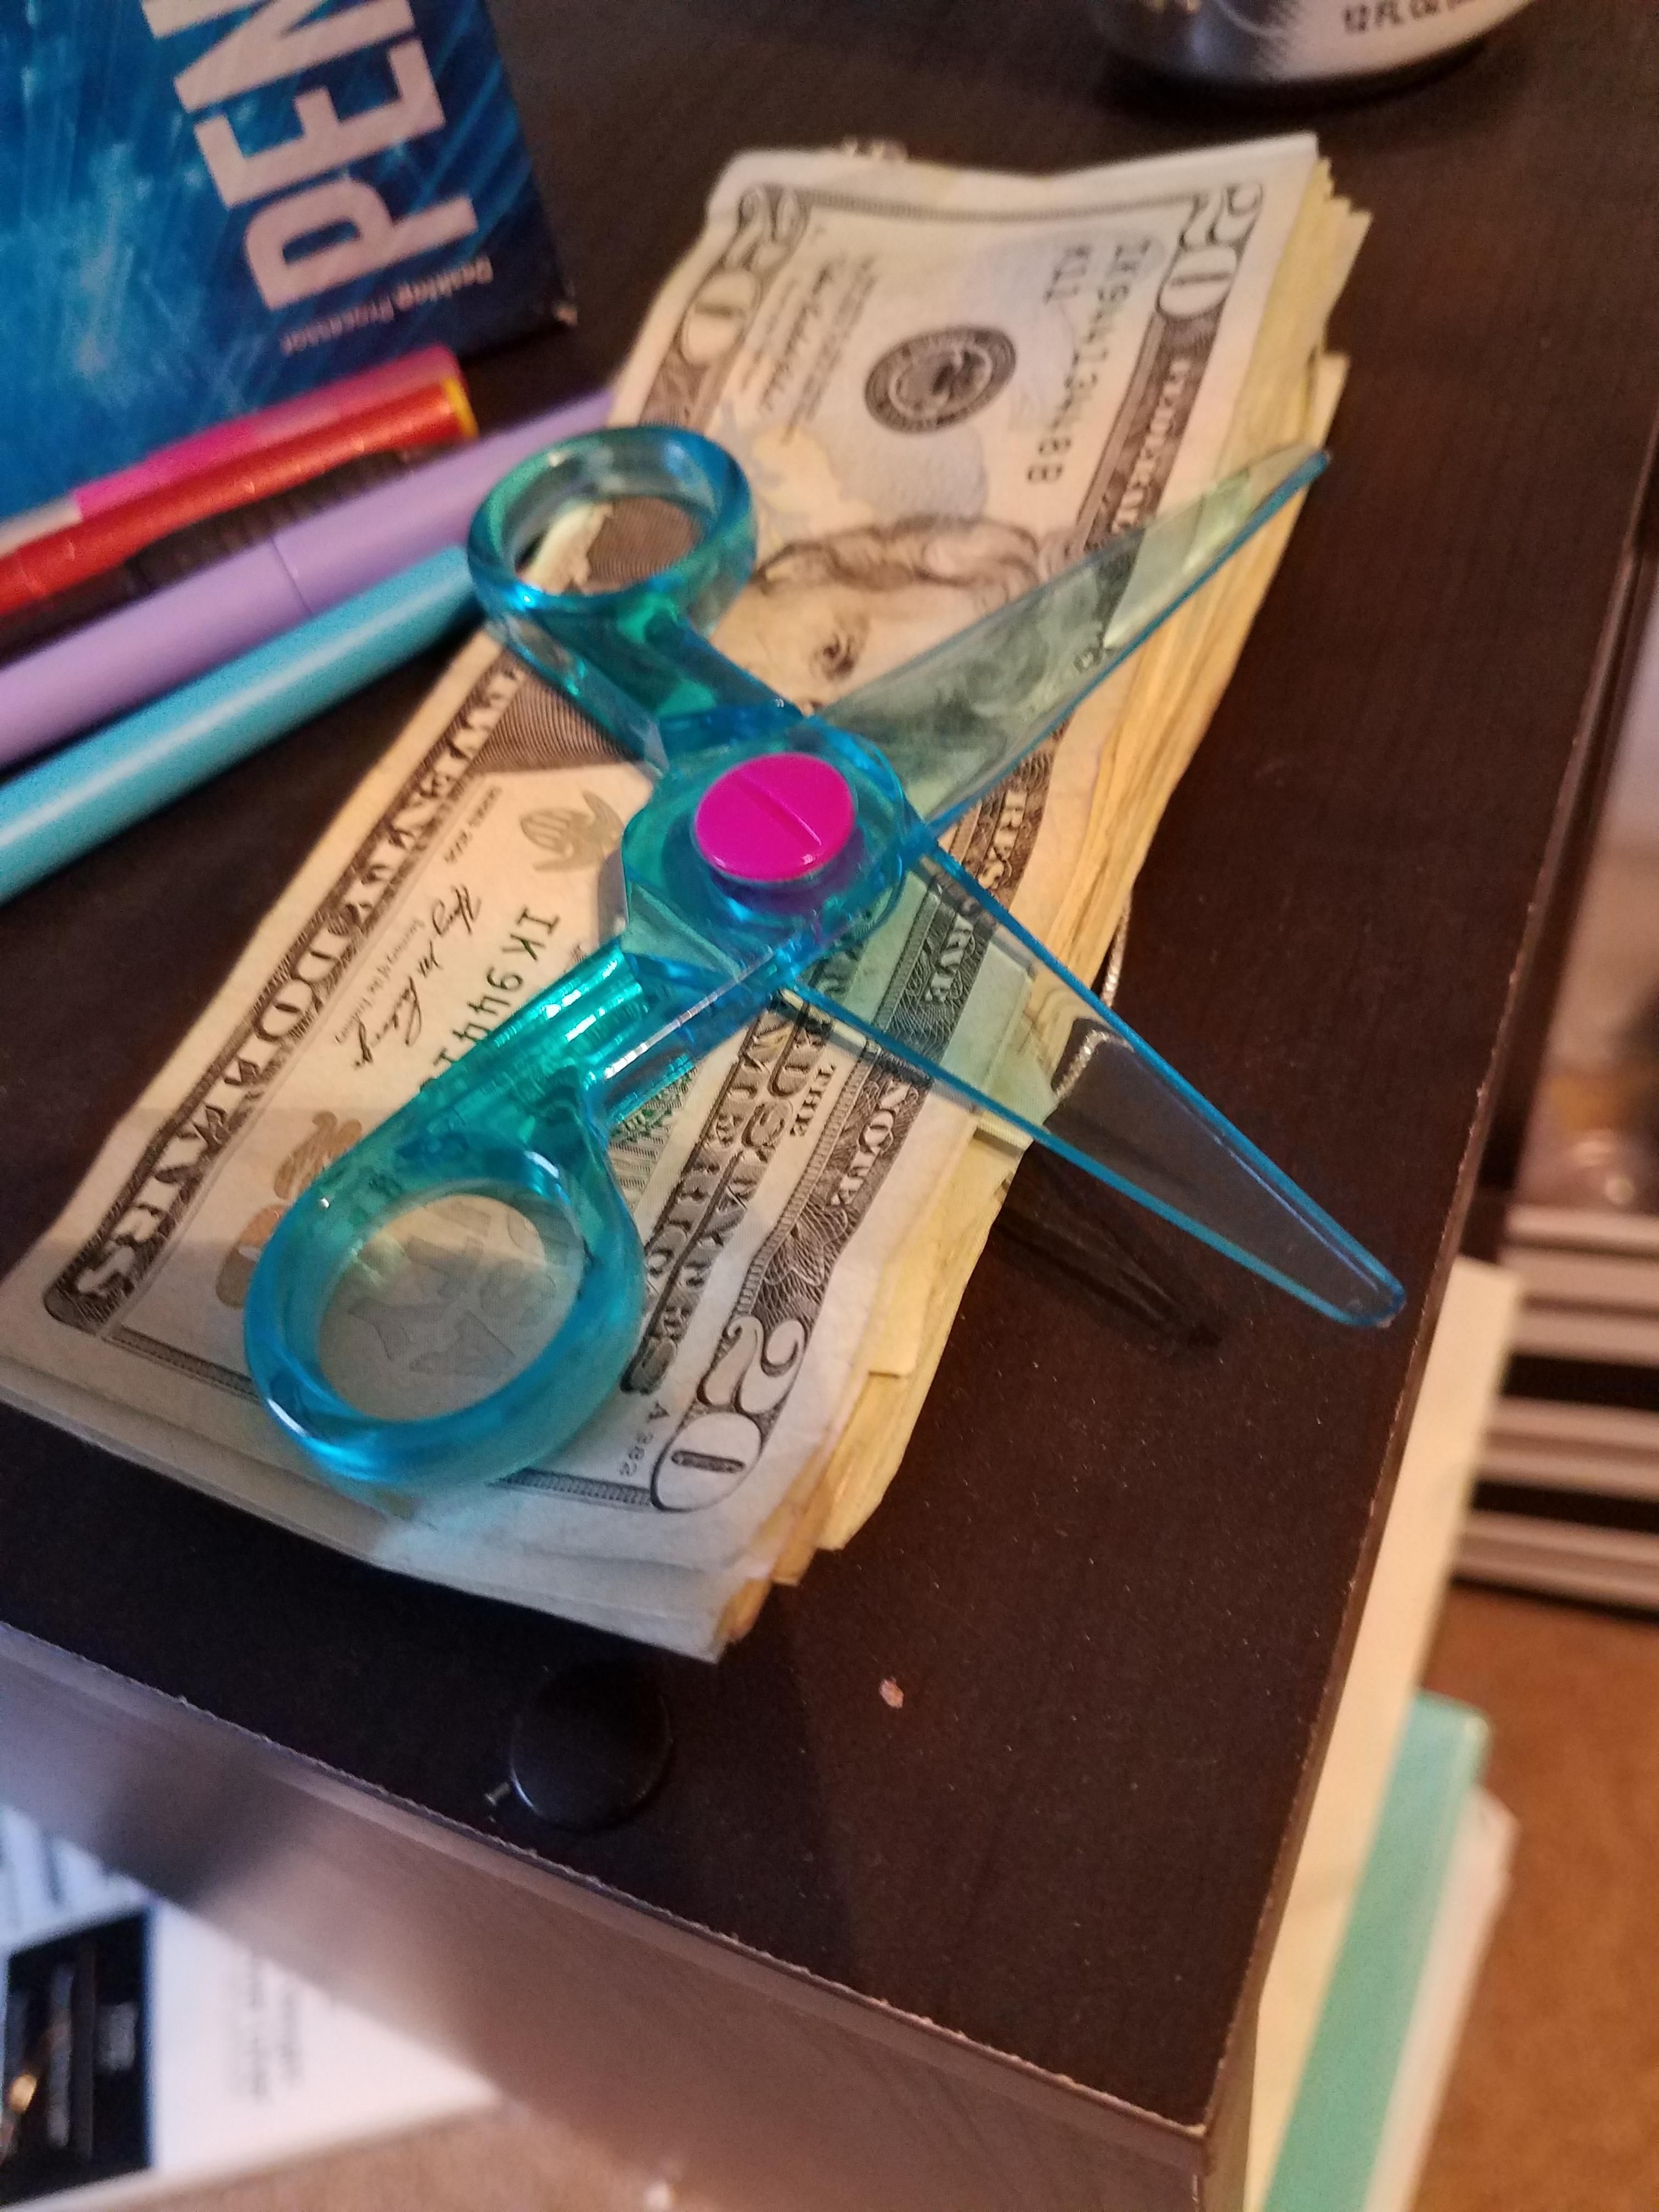 My 4 year old asked if she could use her new scissors to cut some paper she found. I'm sure glad I looked to see what she had first. Our rent.